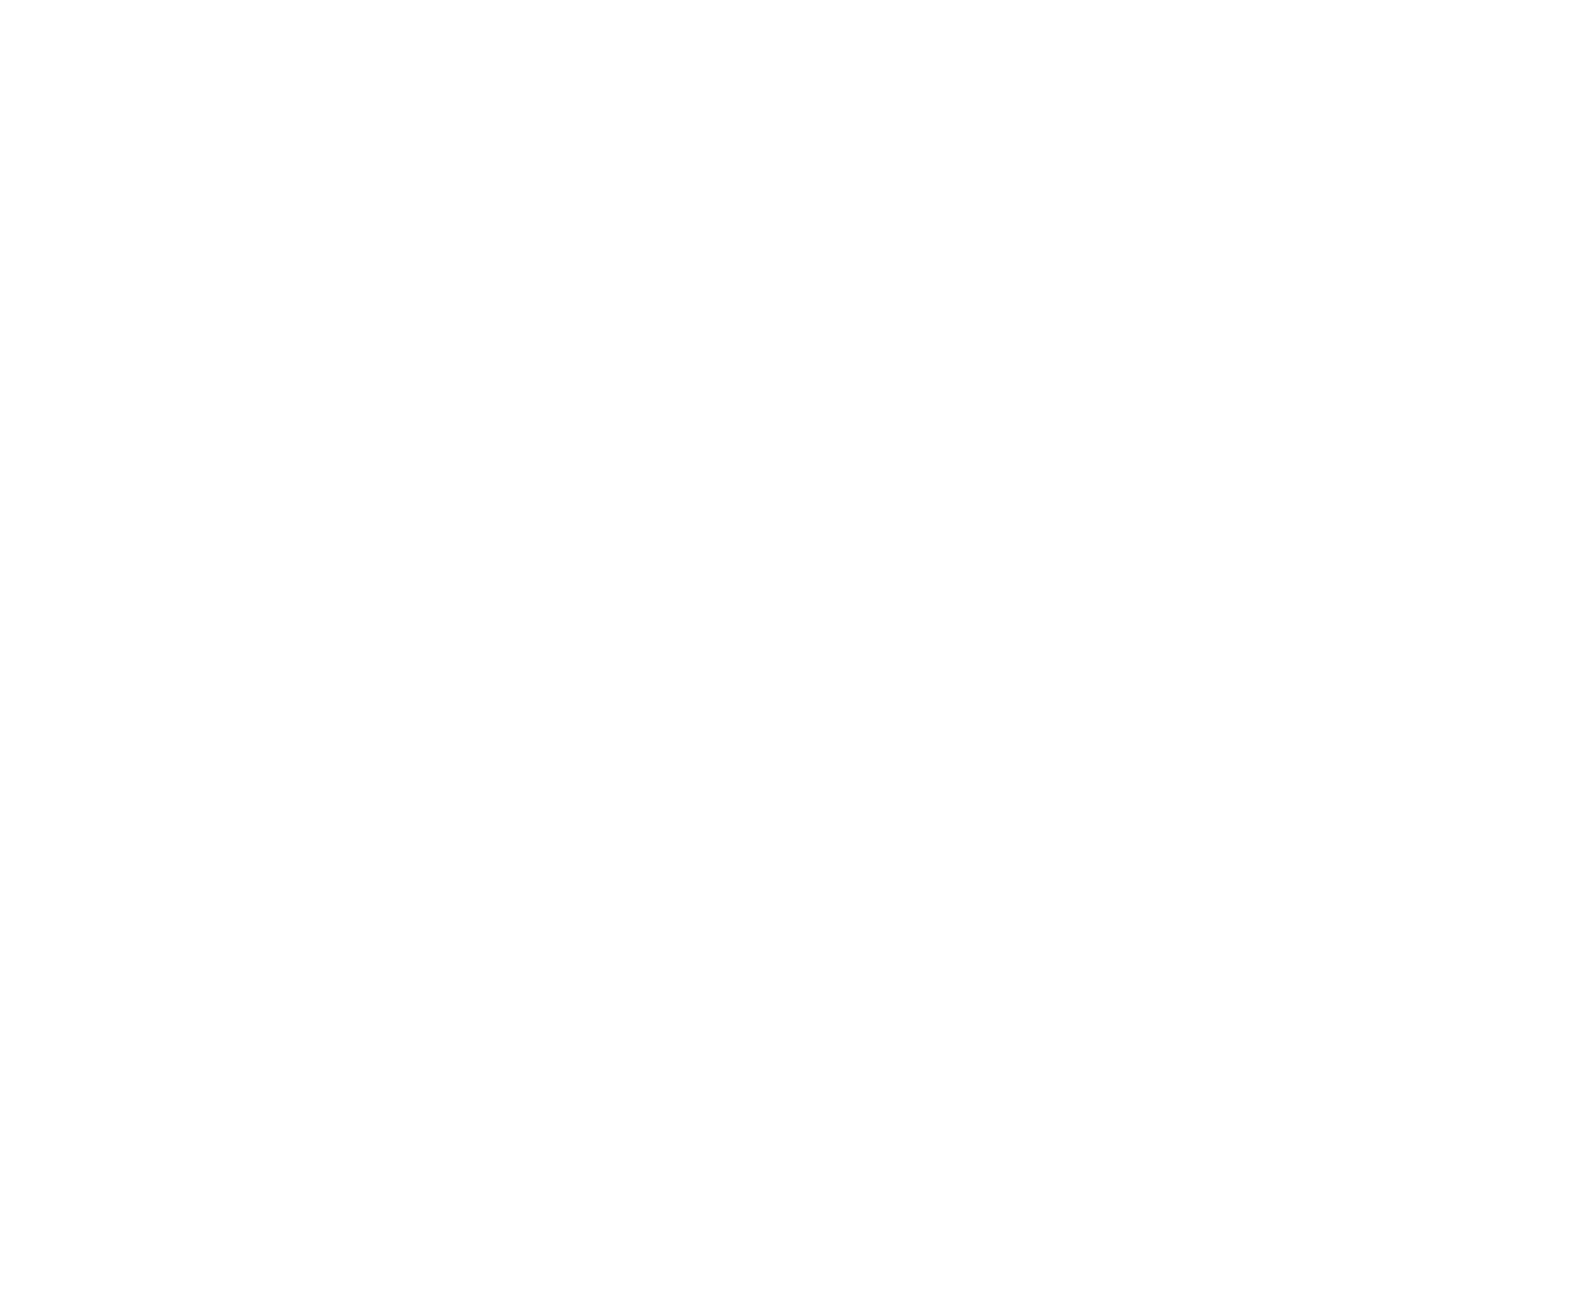 one T letter is upside and the other T letter is downside logo of Tahoors Creative Marketing in white color and transparent background